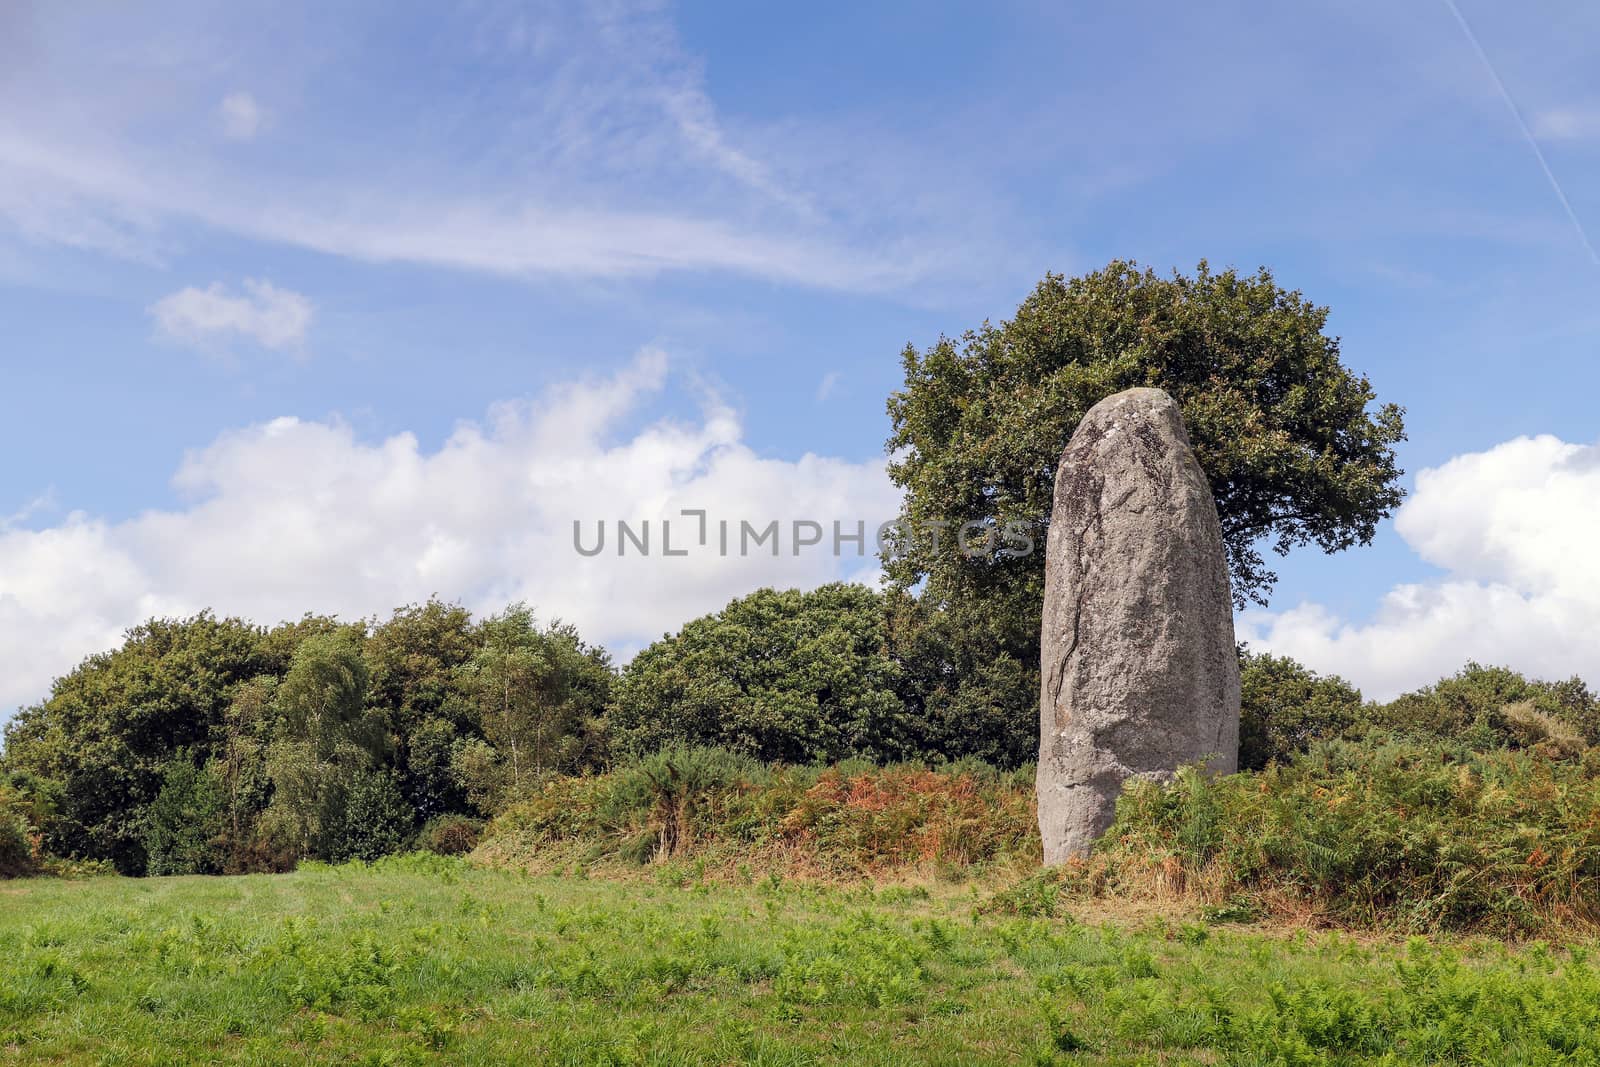 Menhir of Kergornec - megalithic monument in Brittany, France by Mibuch